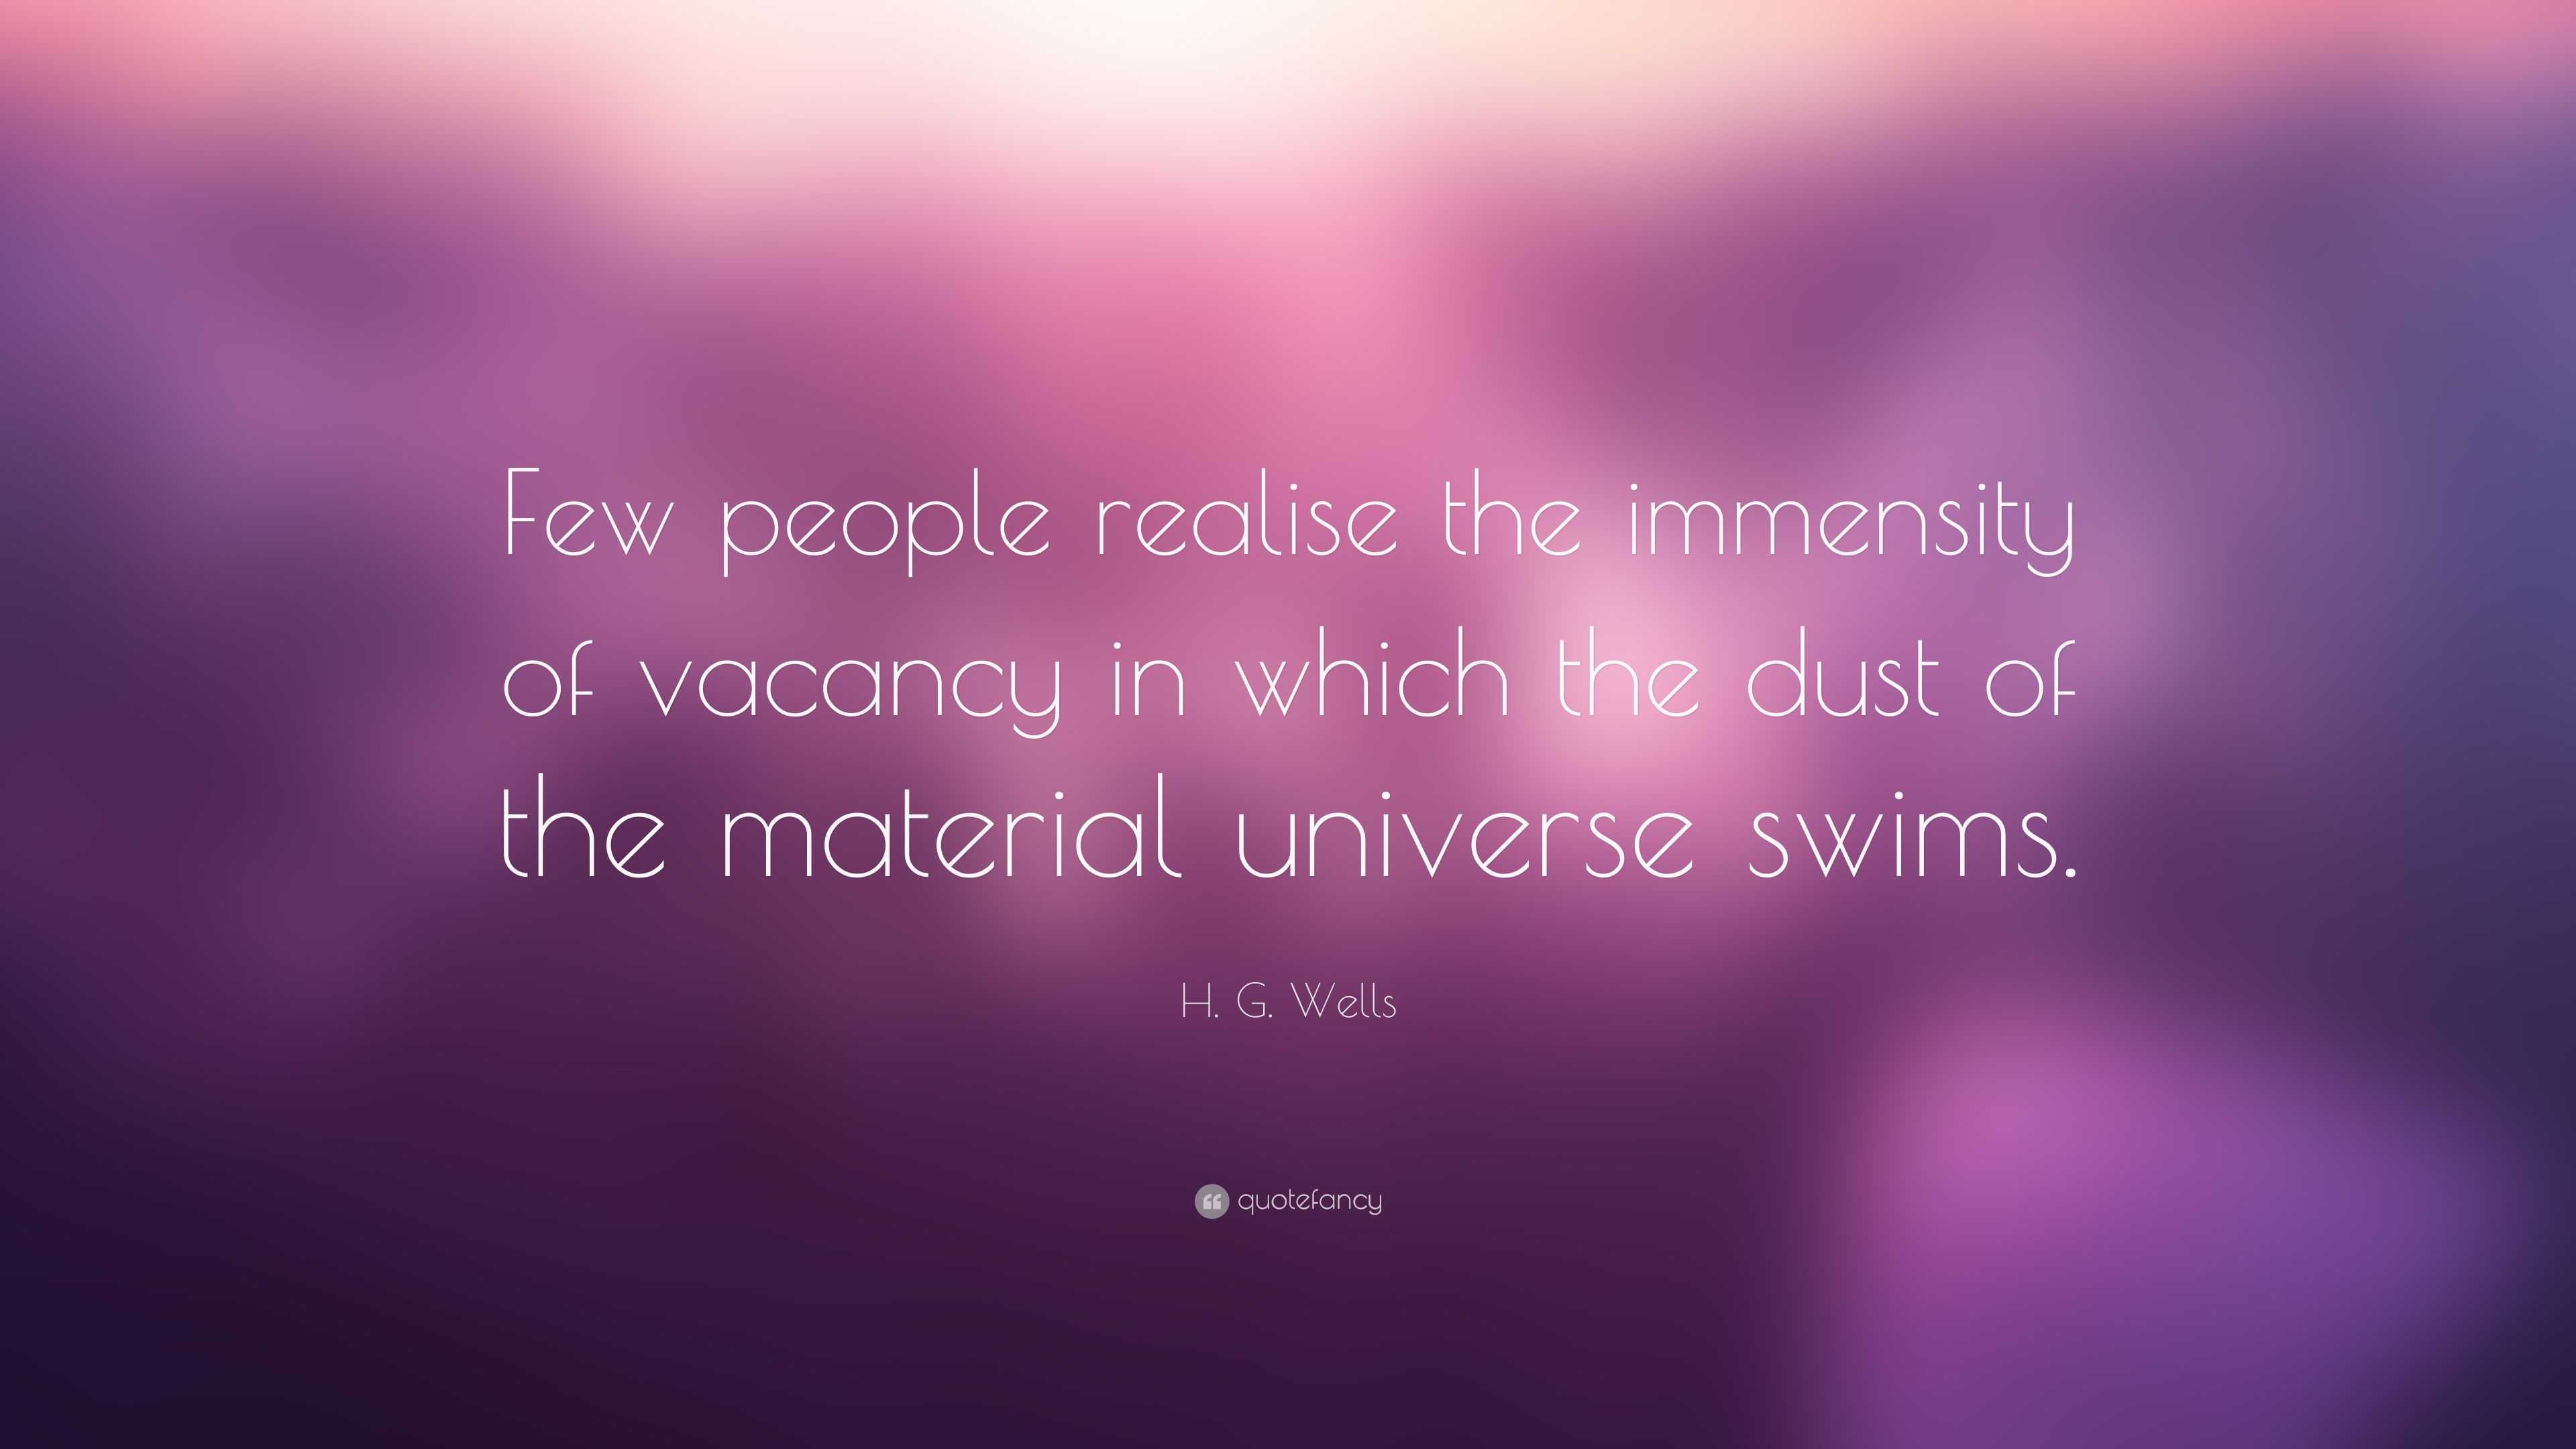 H. G. Wells Quote: “Few people realise the immensity of vacancy in ...